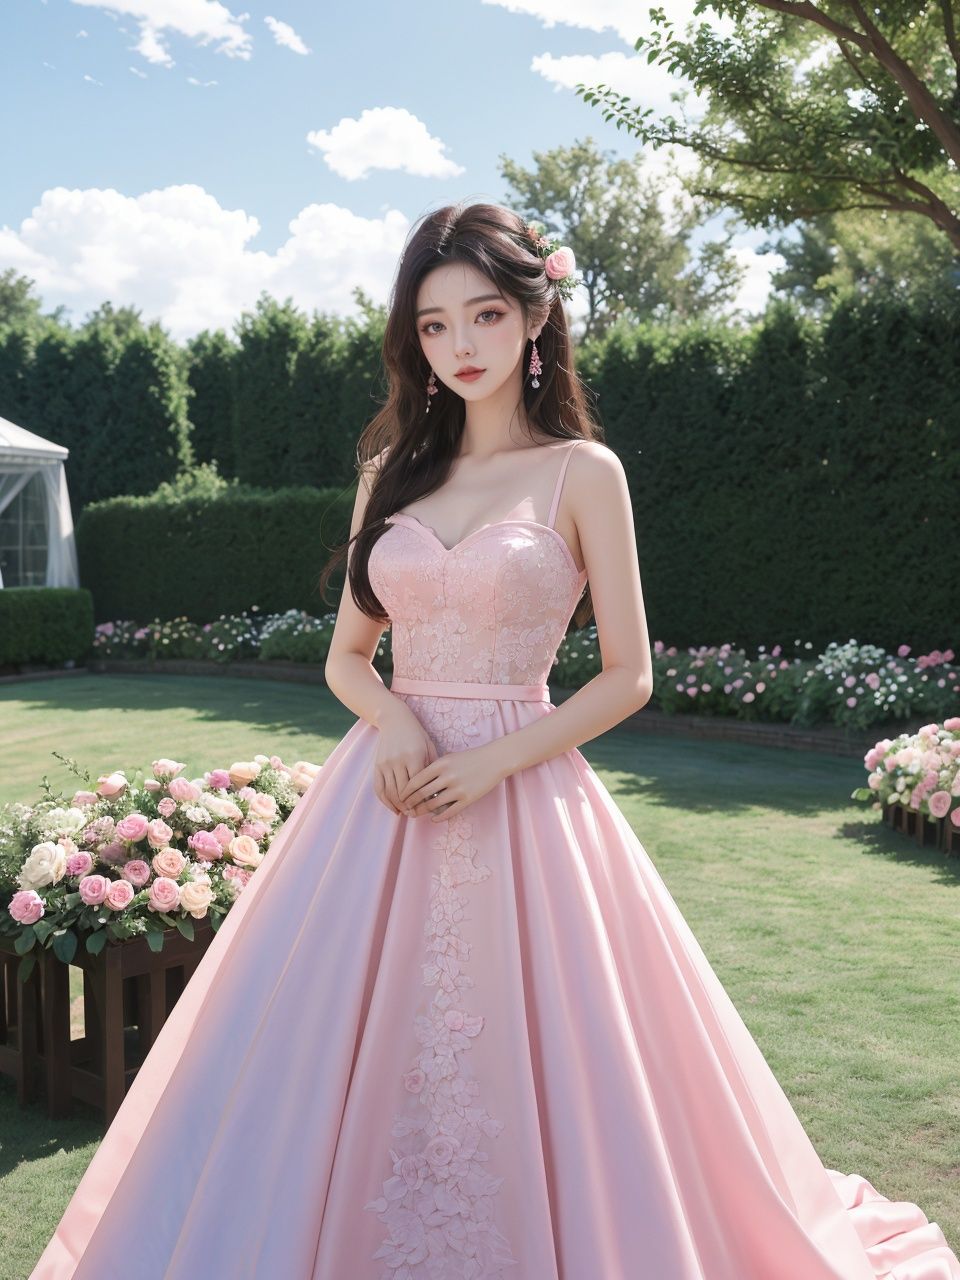 masterpiece,1 girl,22 years old,Look at me,Exquisite makeup,Black hair,Long hair,Pink wedding dress,Outdoor,Light blue sky,Clouds,Garden,Stand,In the middle of the picture,Whole body,Plenty of roses,textured skin,super detail,best quality,